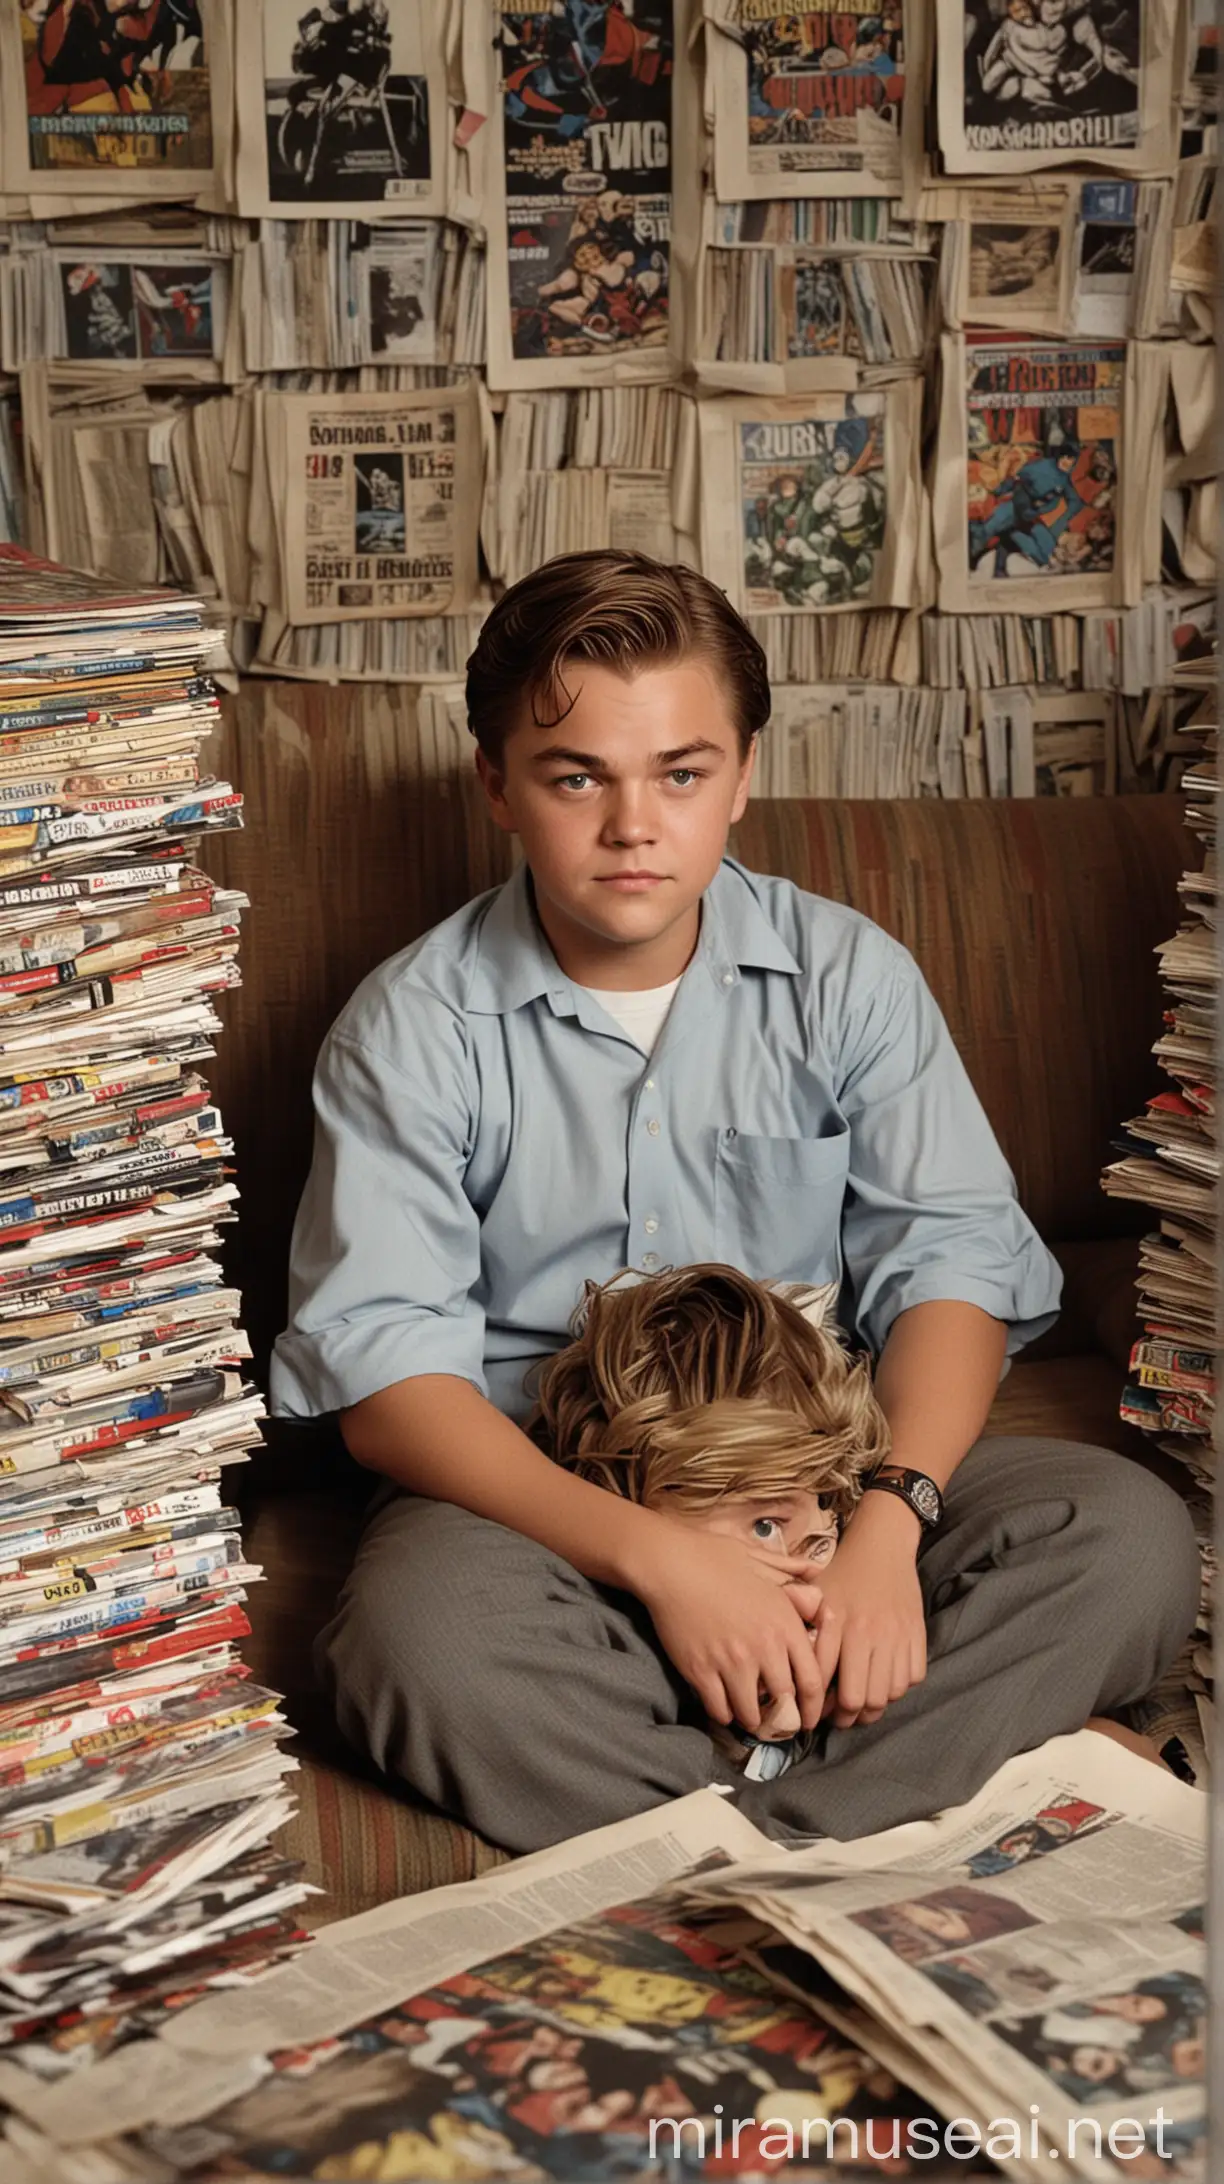 - "A young Leonardo DiCaprio sitting on a couch in his childhood home, surrounded by stacks of comic books and TV scripts, with a determined look on his face."